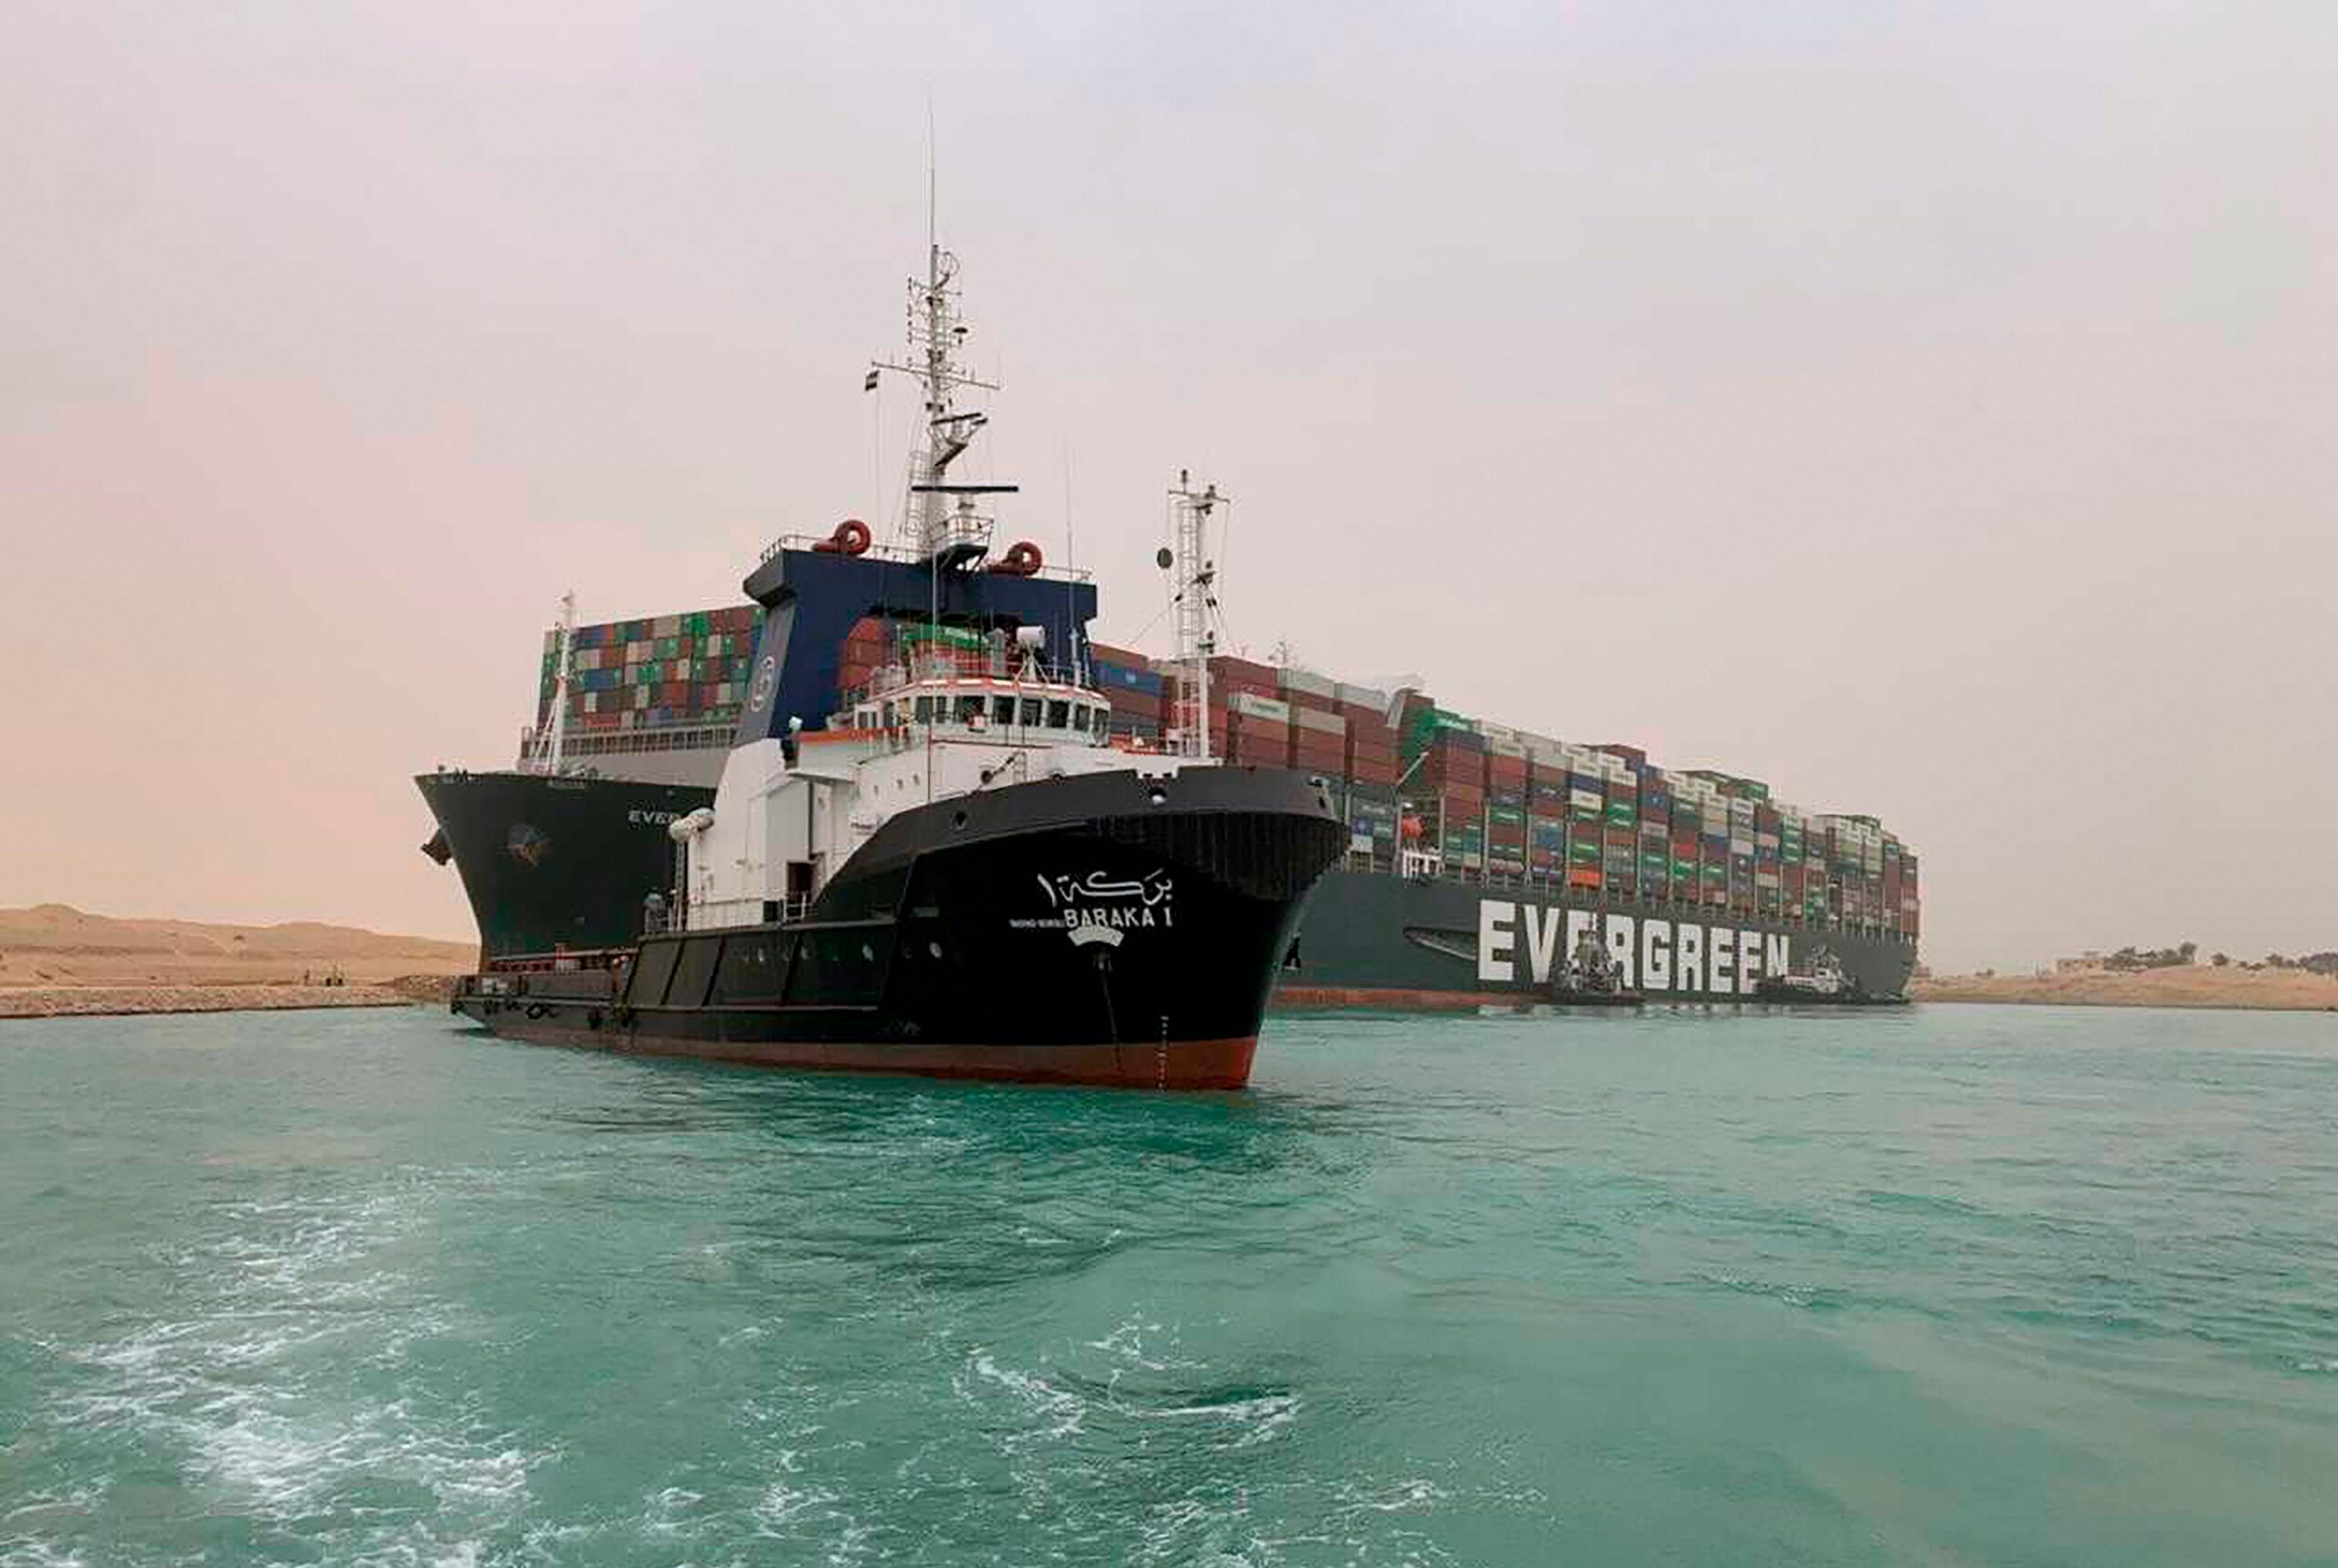 ‘Evergreen’ or ‘Evergiven’, what is the name of the ship stranded in Suez?